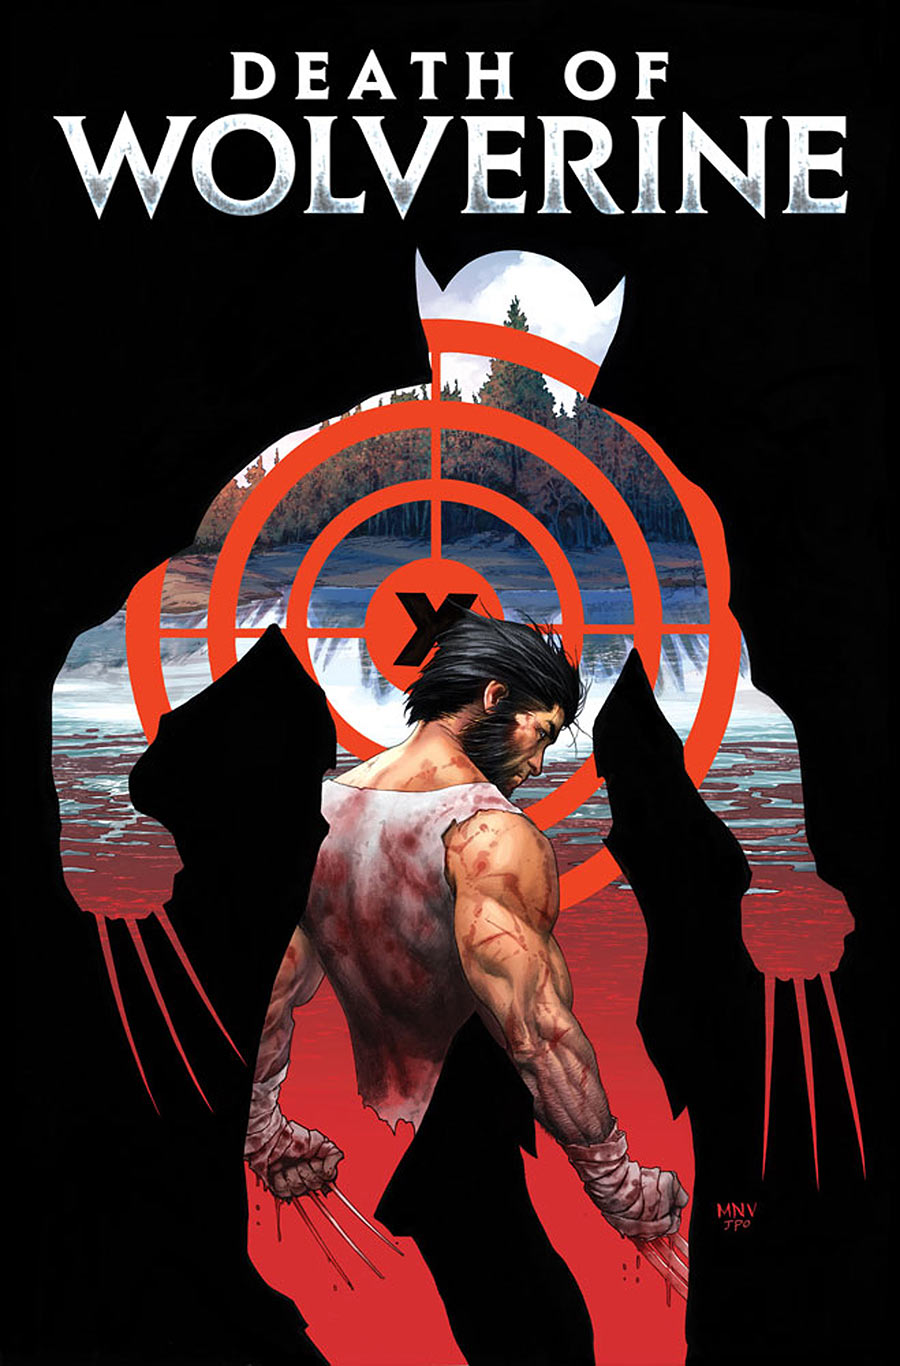 Death of Wolverine #1 by Charles Soule - Goodreads